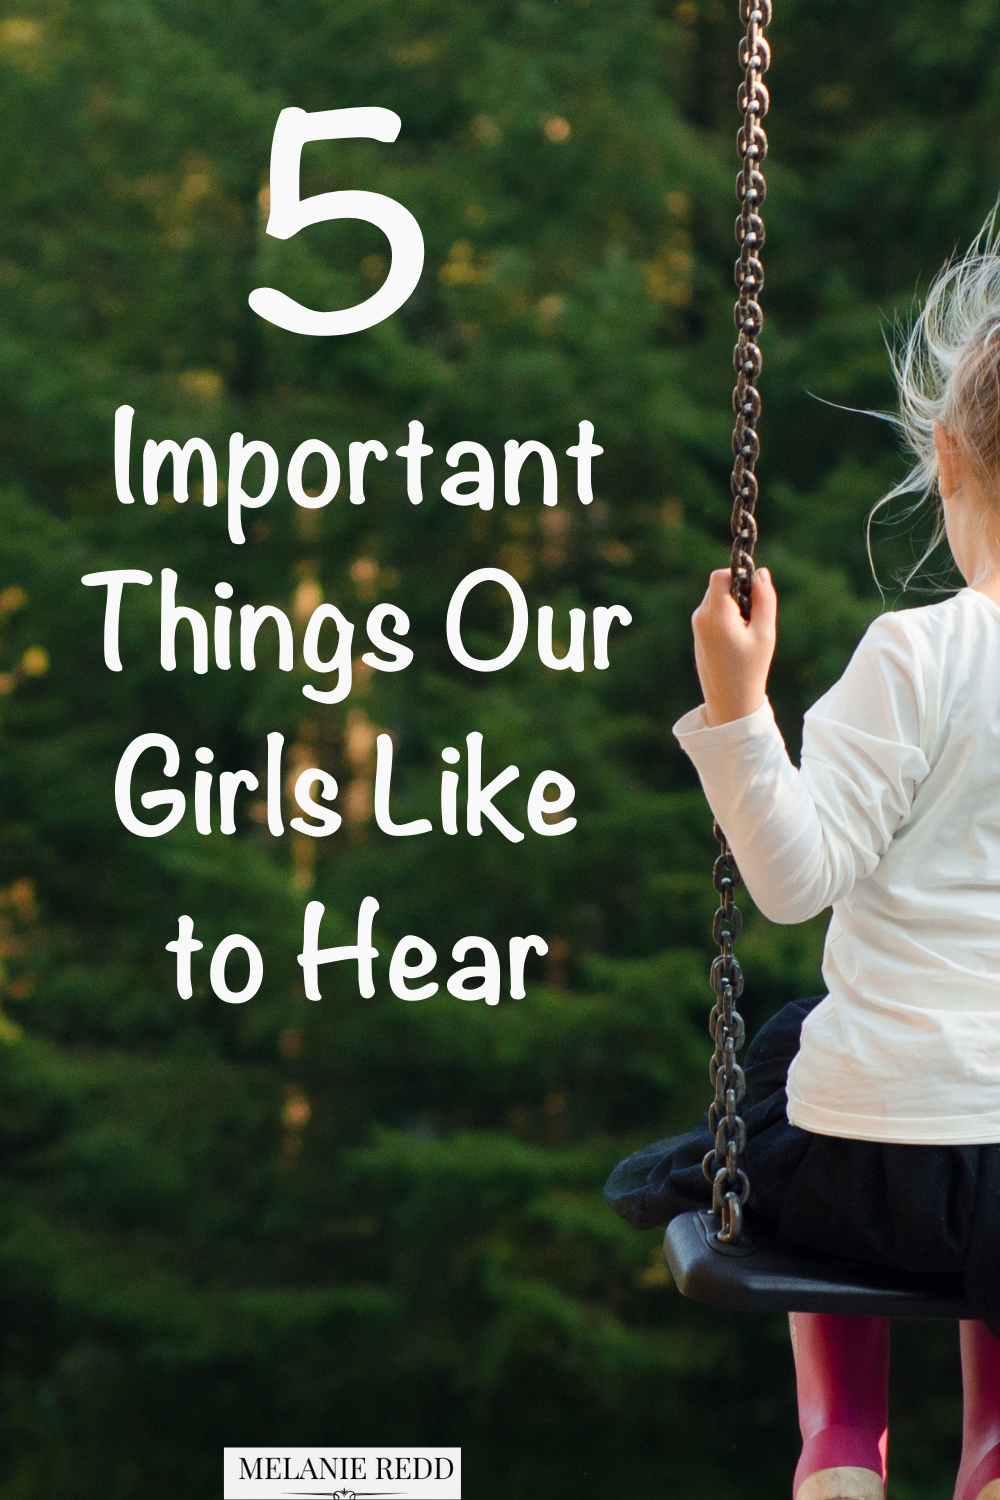 Raising daughters in this day and age is a challenge! Here is an article packed with tips and 5 important things our girls like to hear. #everygirl #daughters #encouragemydaughters #hope